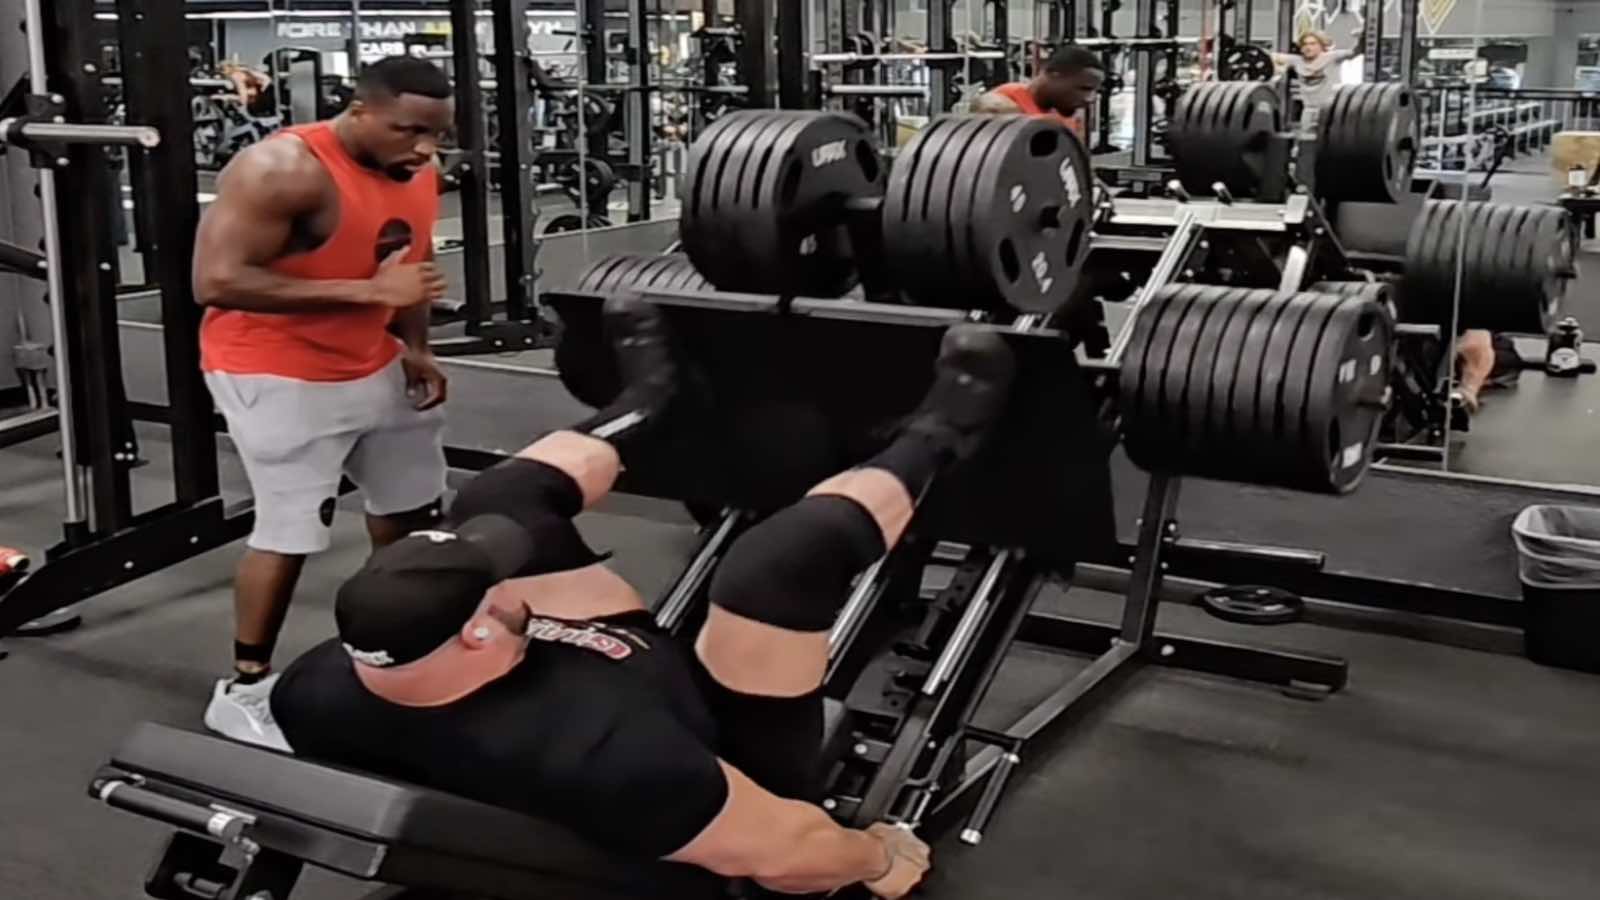 evan-singleton-leg-presses-612-kilograms-(1,350-pounds)-for-12-reps-in-shaw-classic-training-–-breaking-muscle